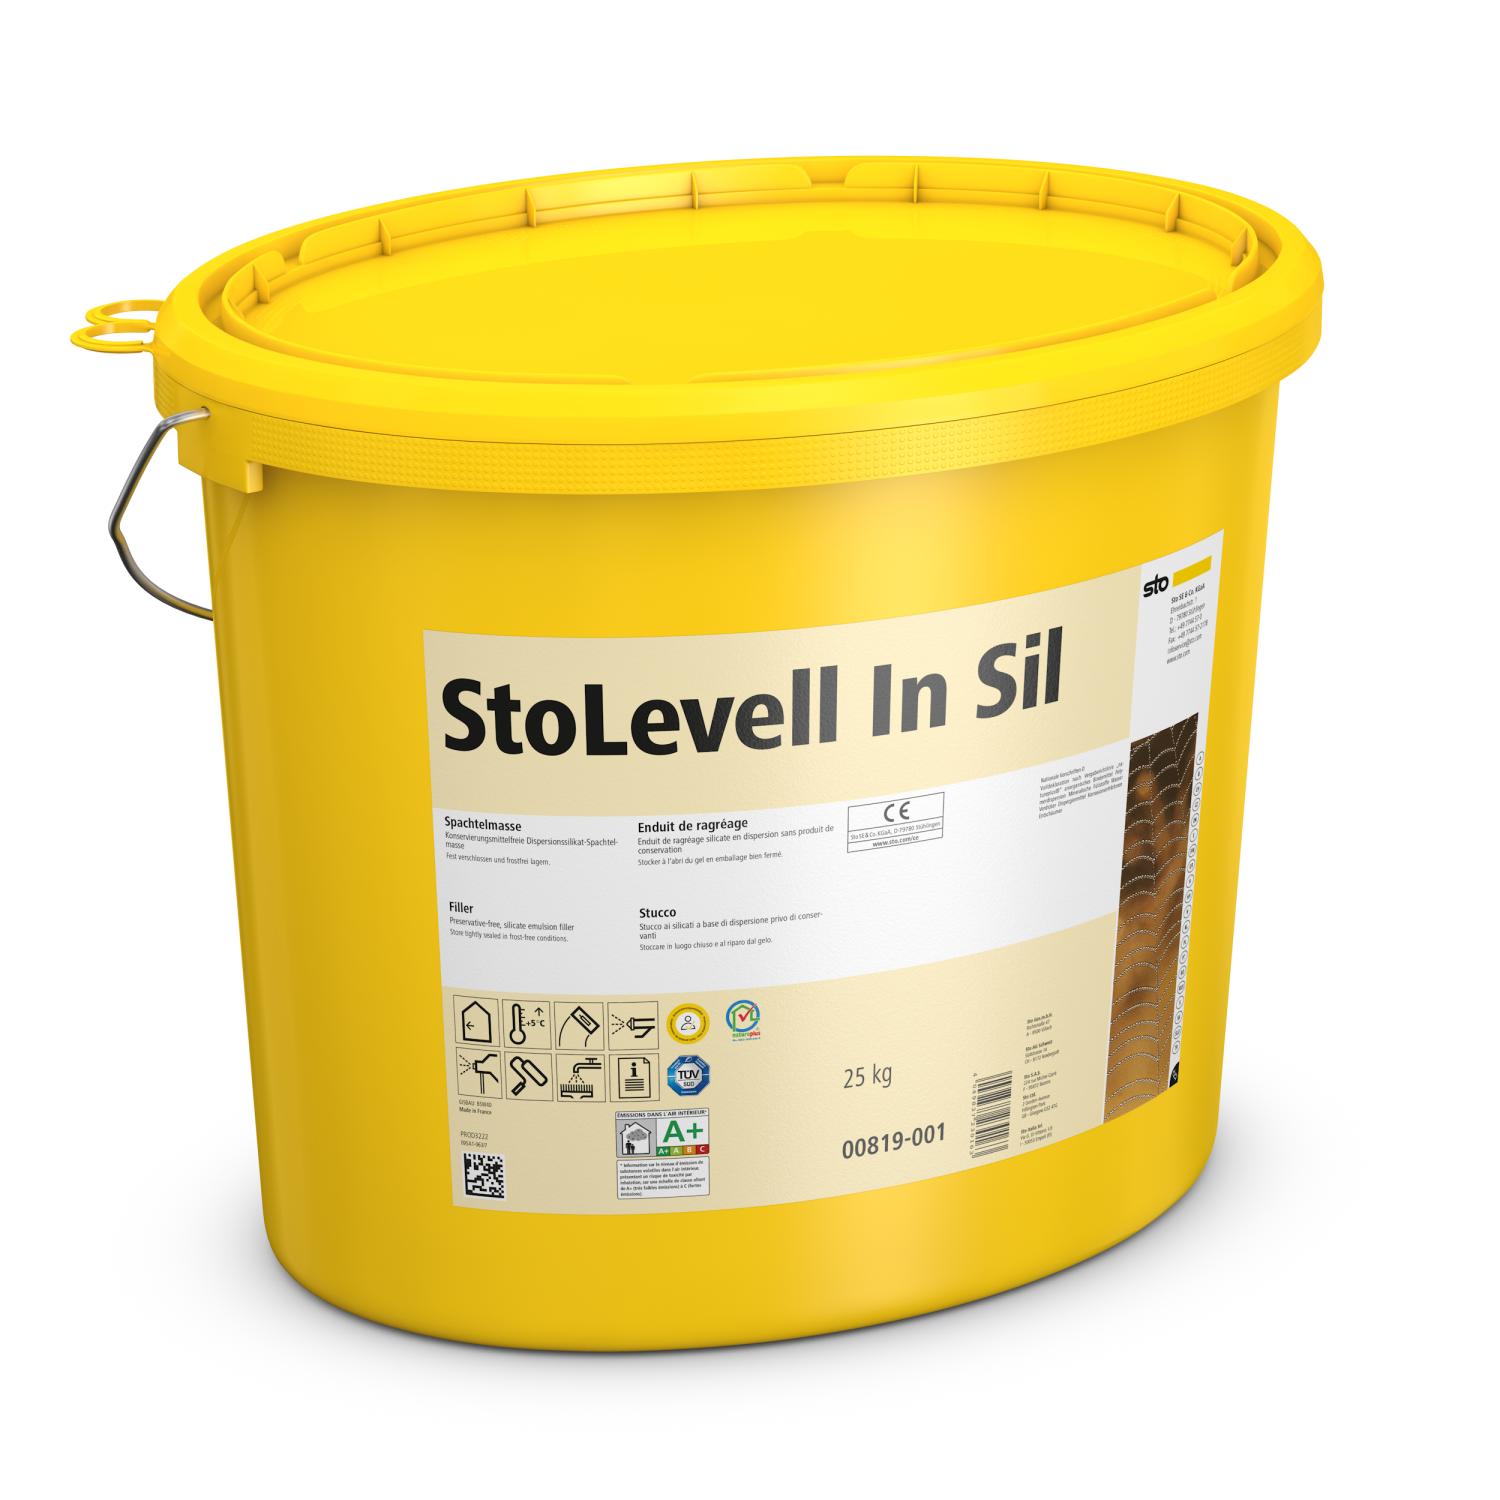 StoLevell In Sil